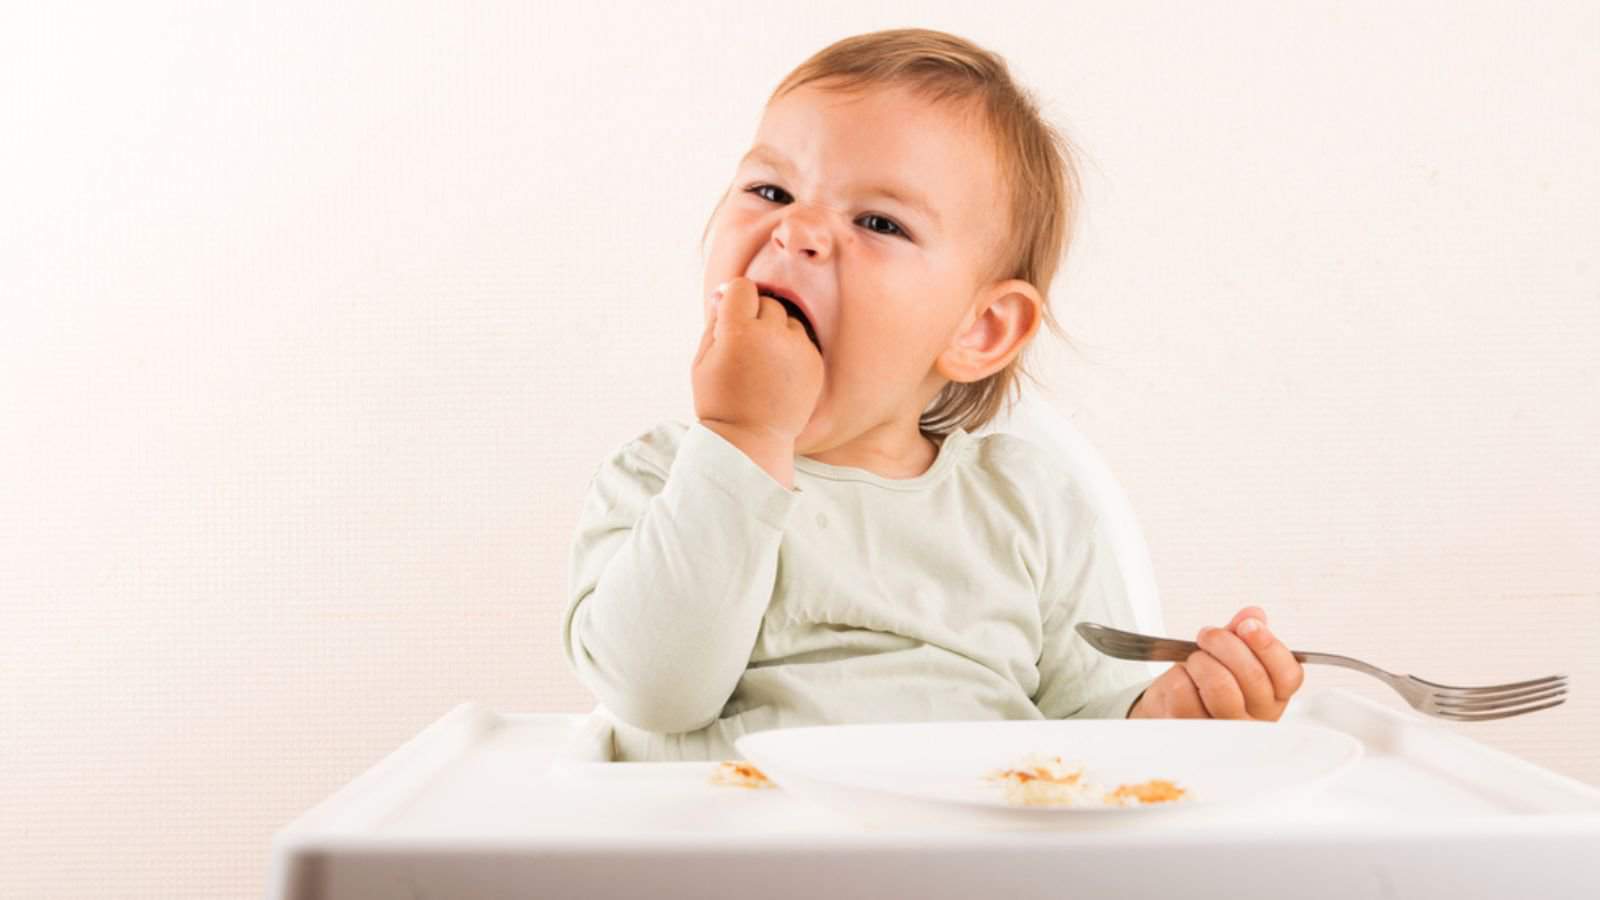 Baby toddler eating pancakes with fork